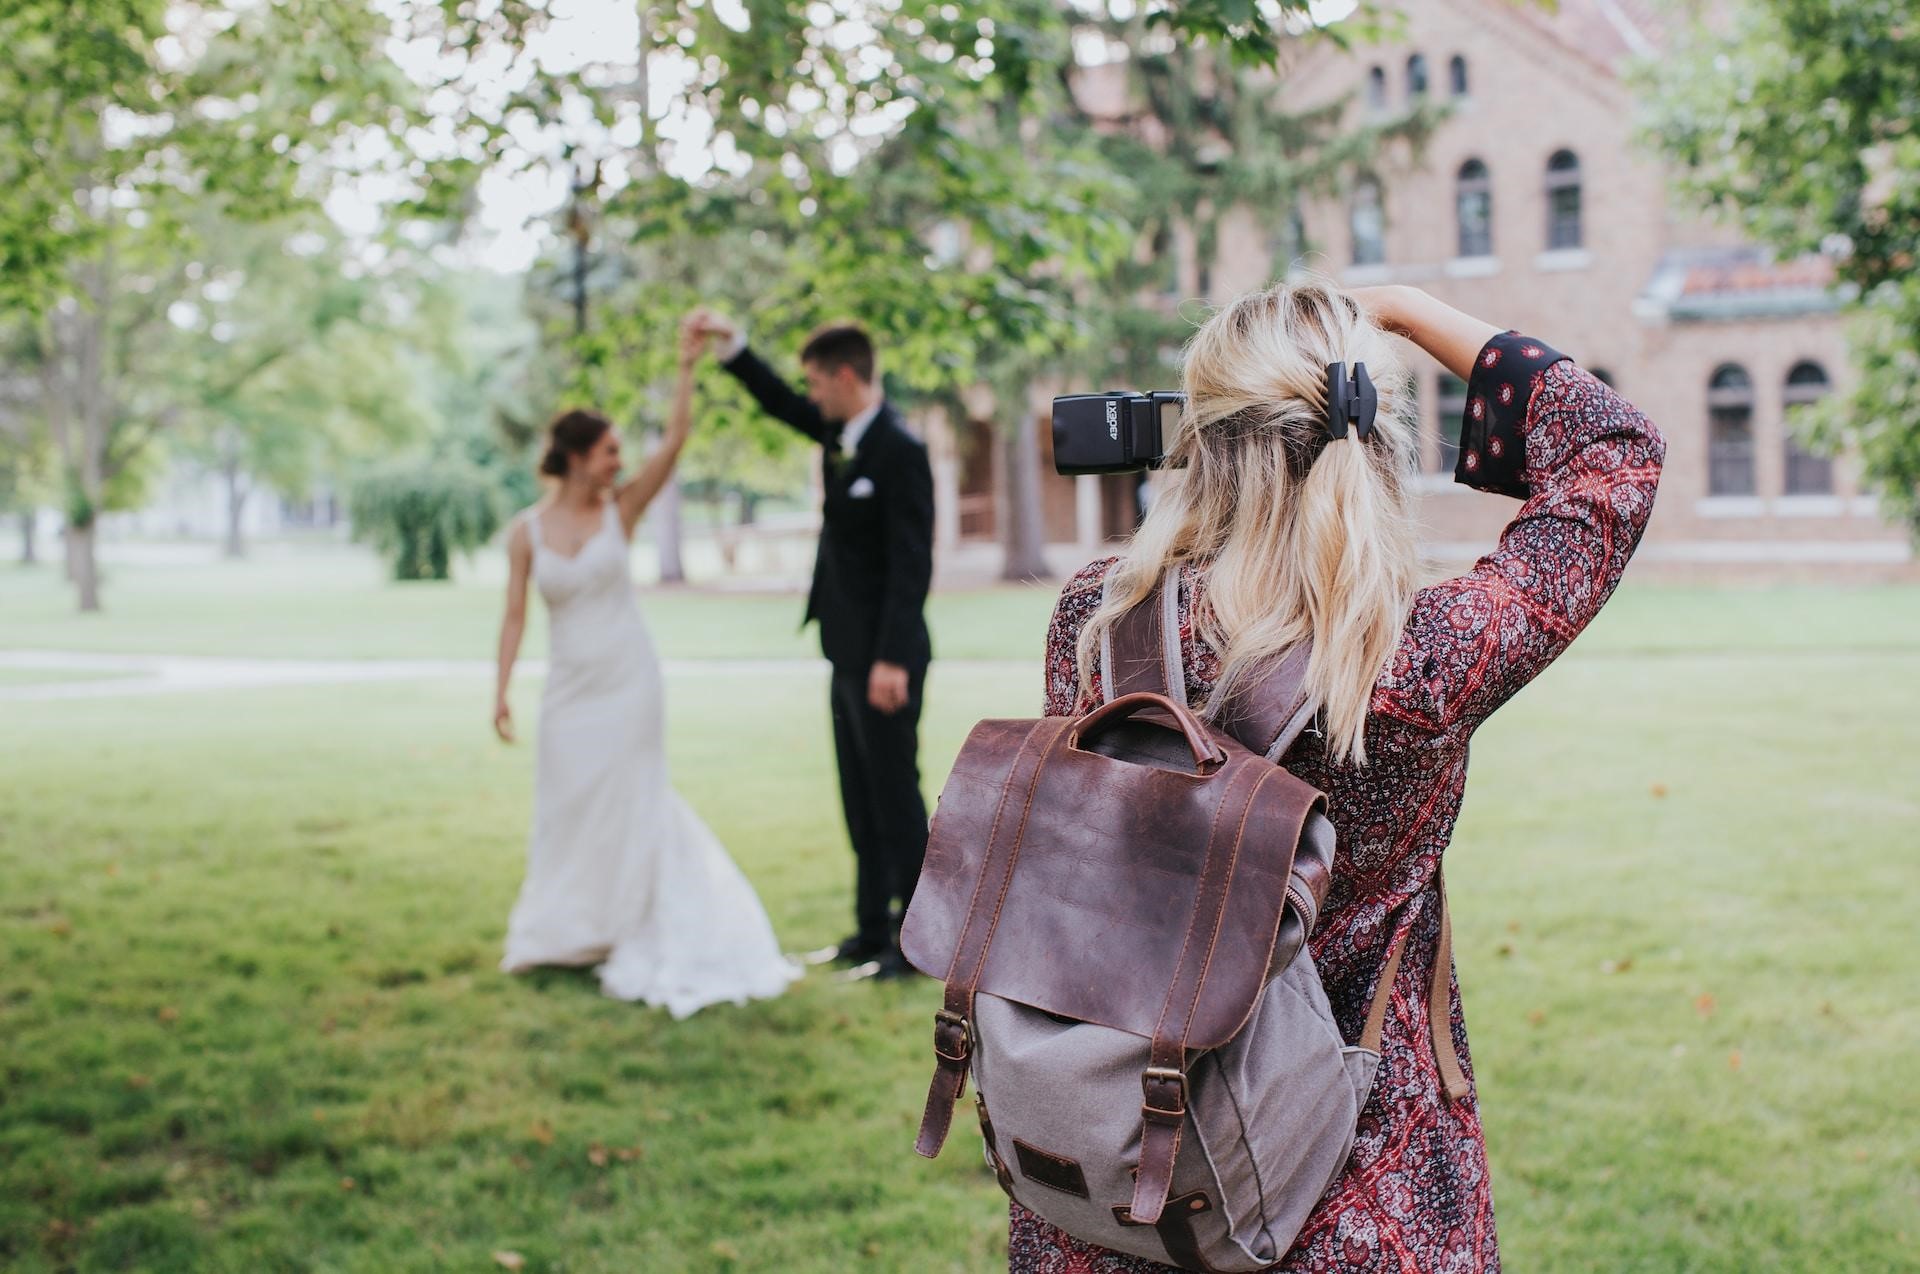 Camera shy? Three tips for increasing your confidence on your wedding day